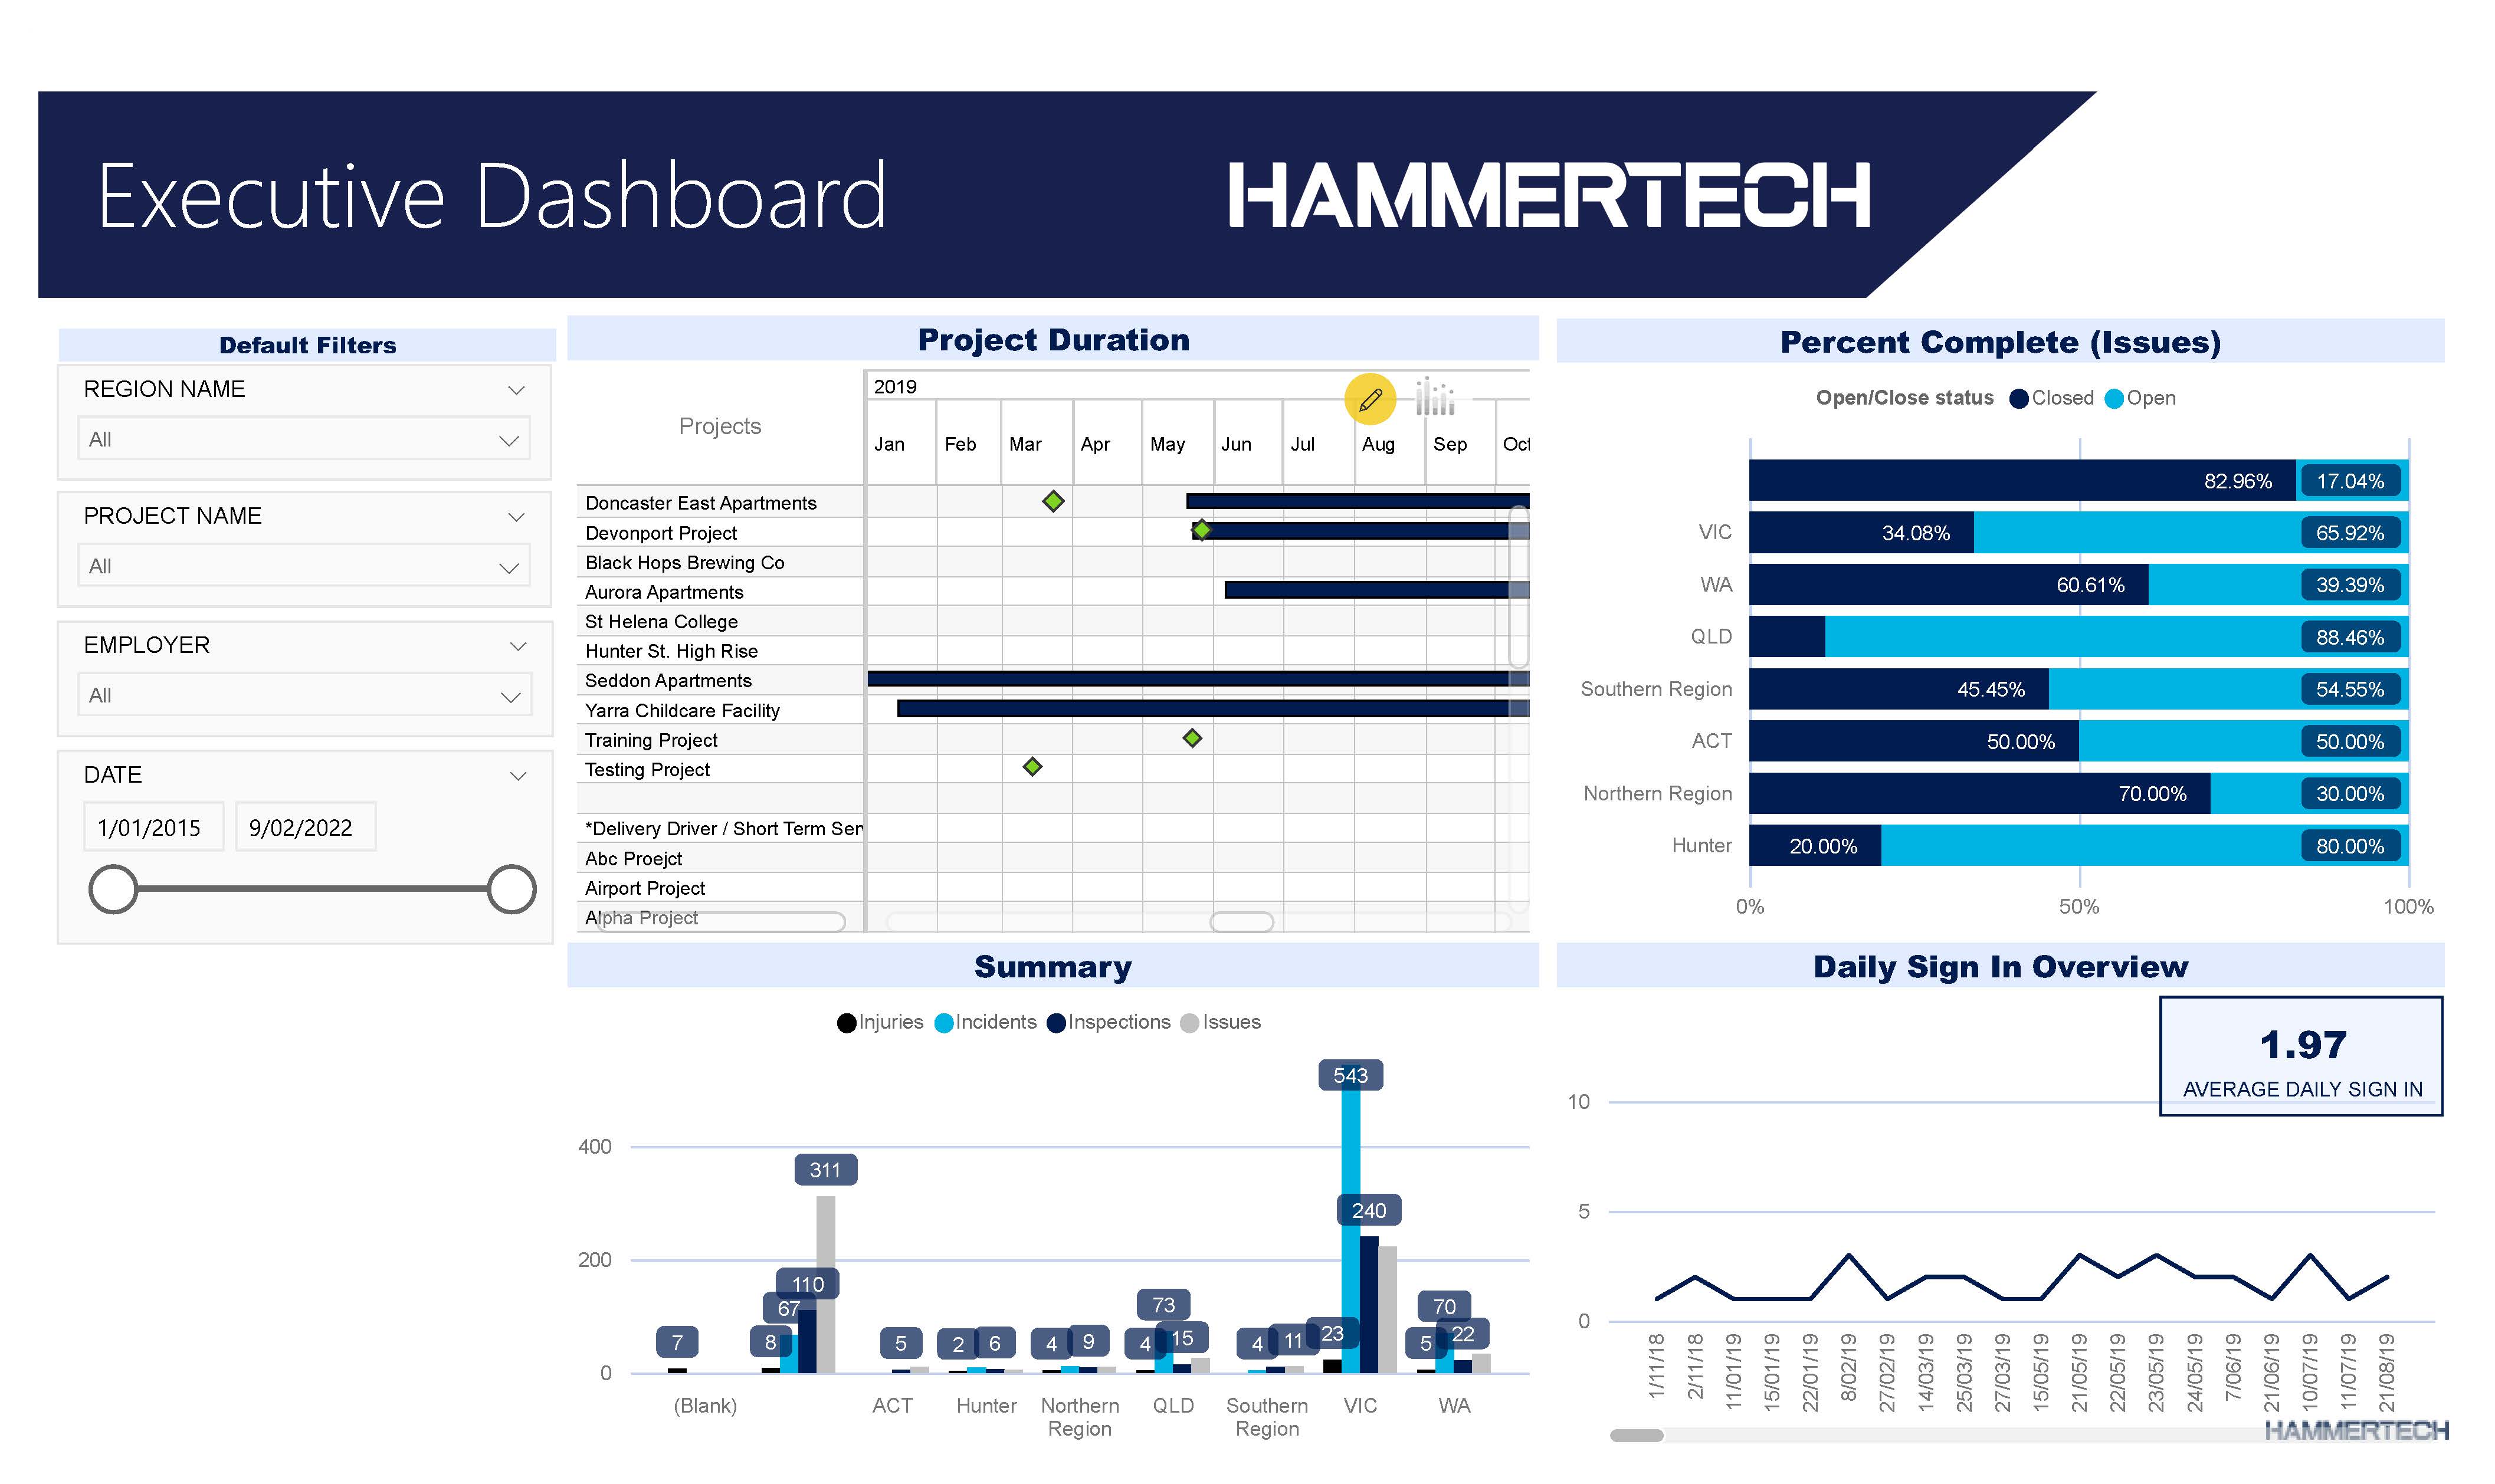 Executive Dashboards for Enterprise-wide Compliance, Risk and Safety that improves project schedules and cost forecasts